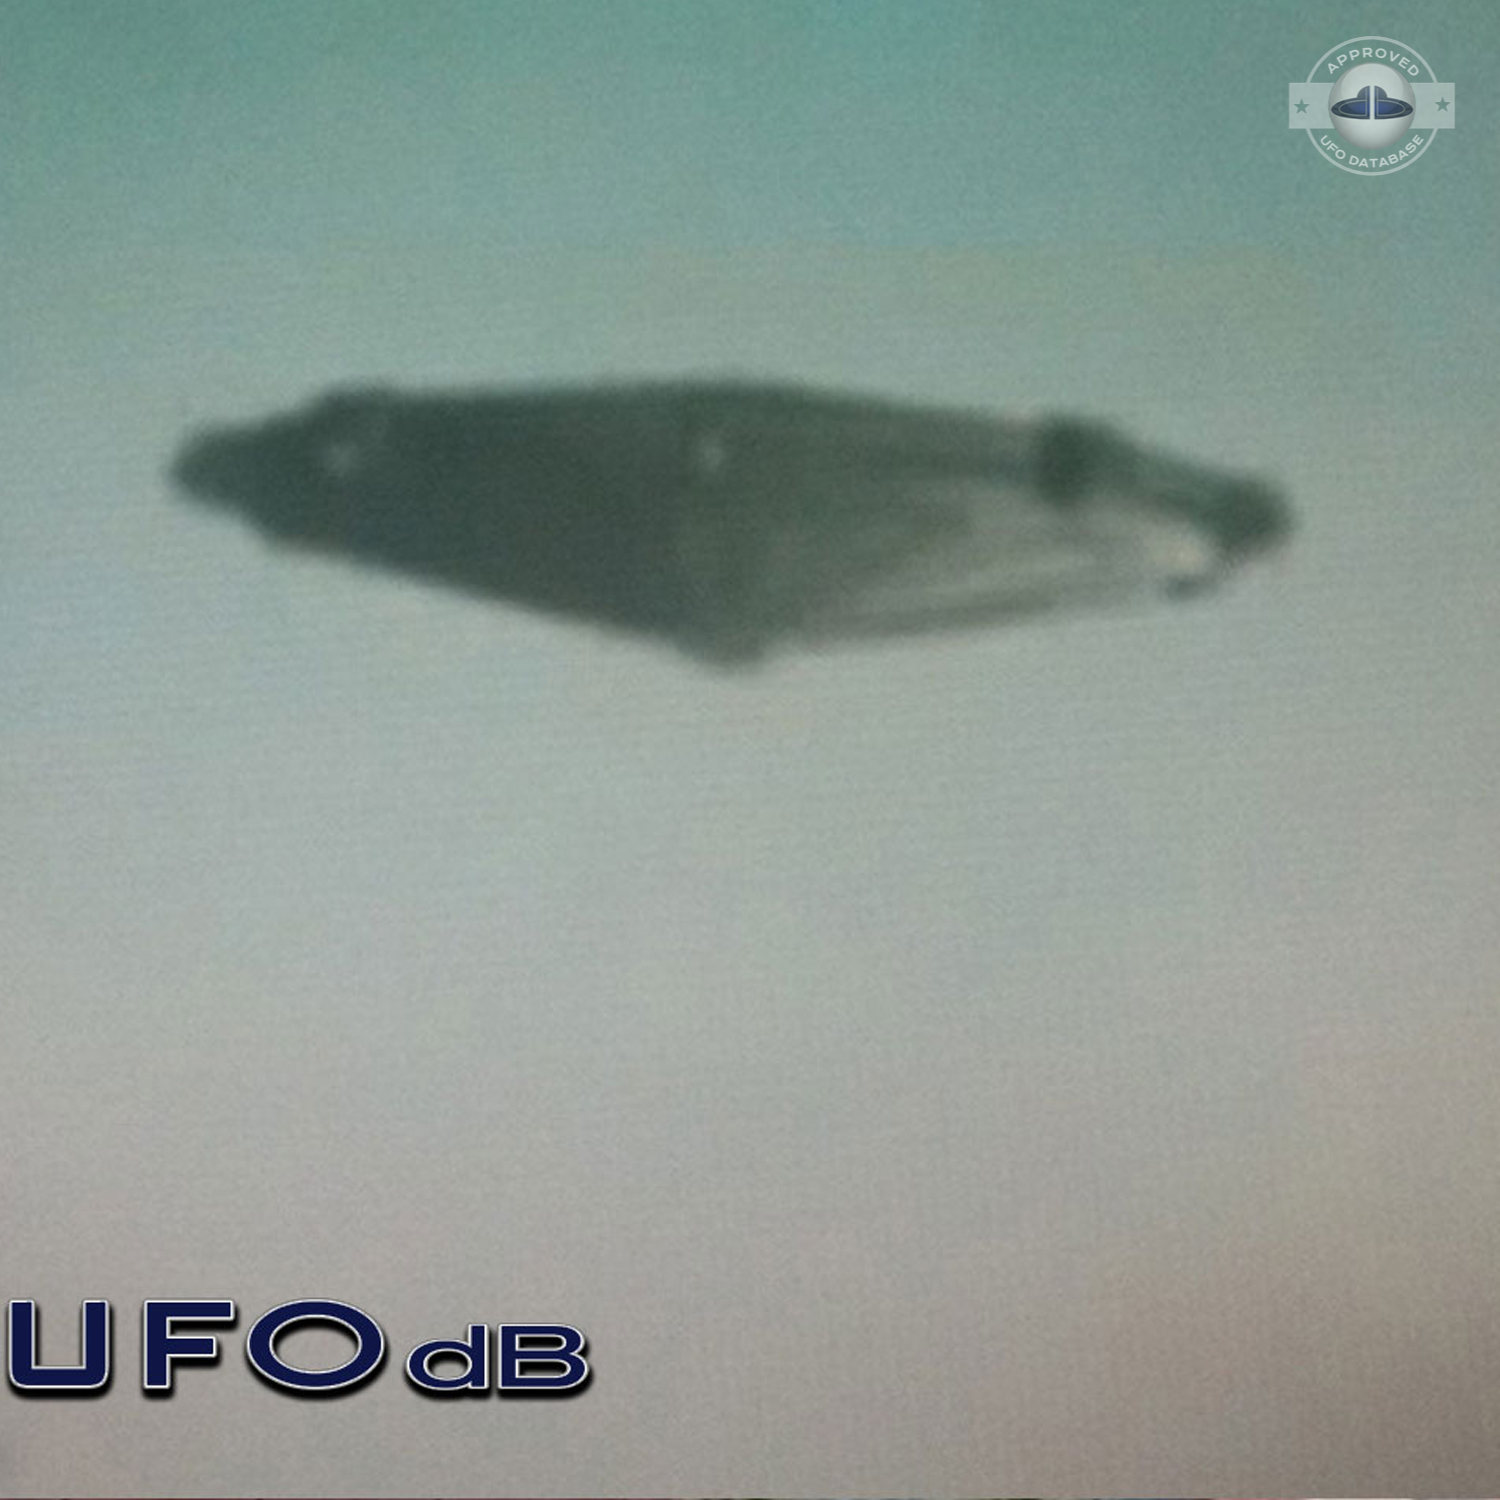 Students saw in amazement the UFO with a metallic flying saucer shape UFO Picture #90-2